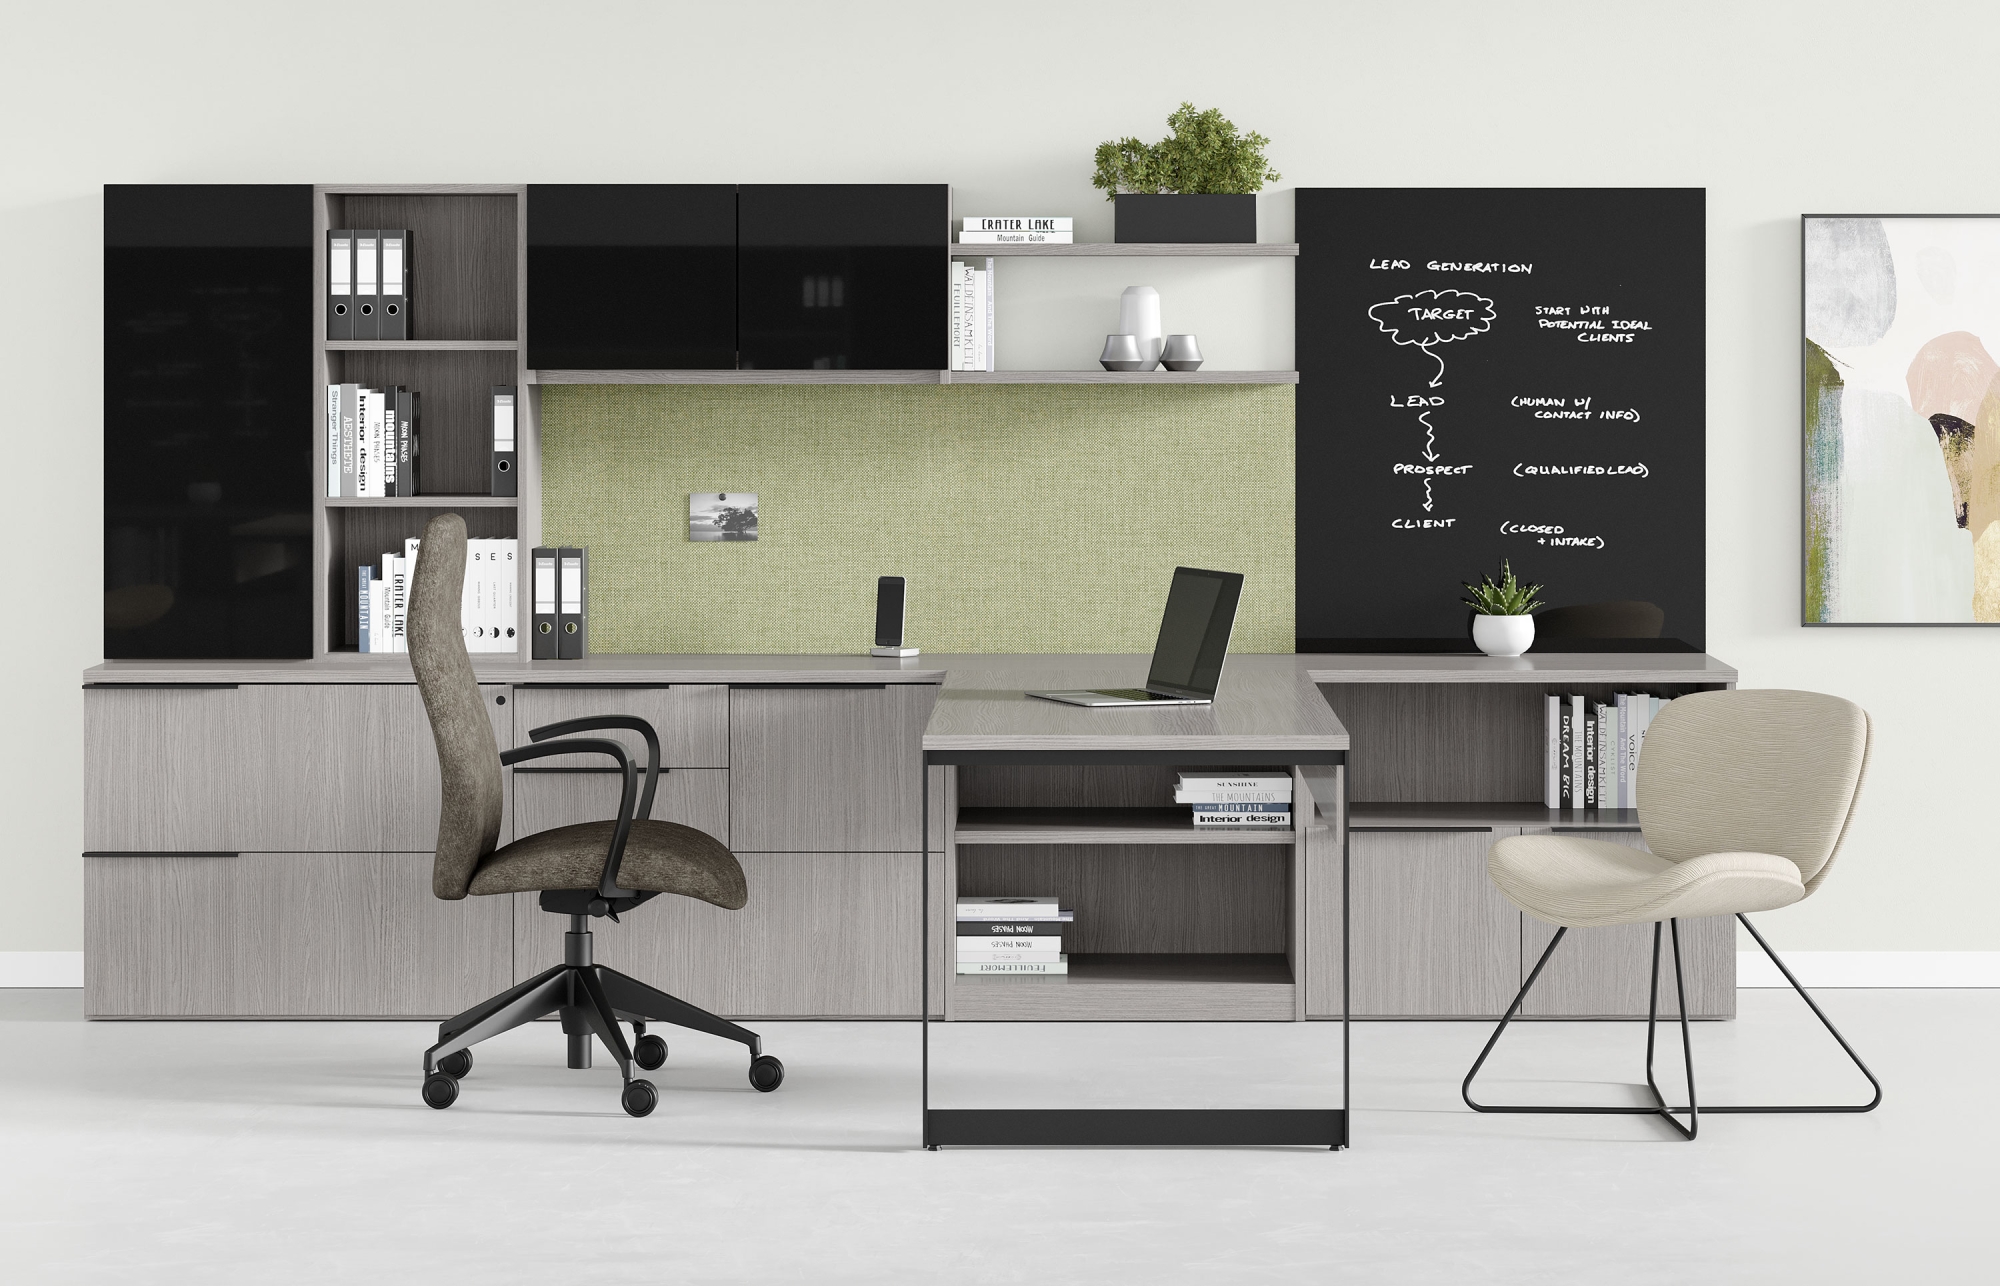 Indiana Furniture, Desks + Workstations, Filing + Storage, Always stylish, comfortable and effortlessly adaptable, Canvas